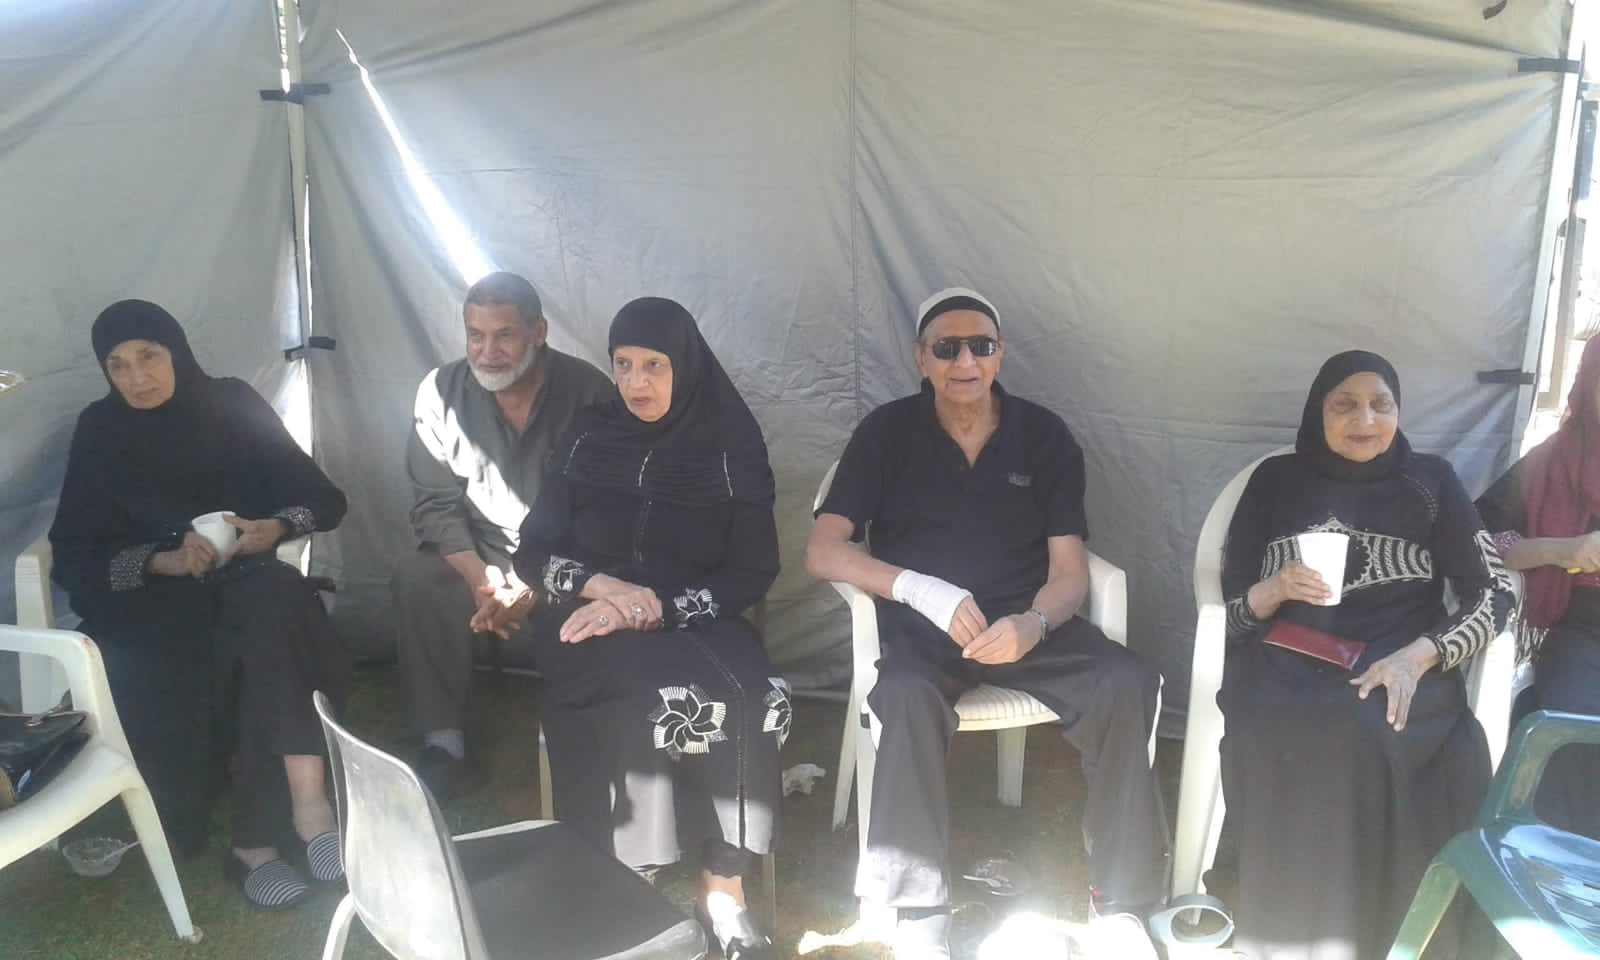 Ismail Sooliman and his sister Hajra (who is currently ill), her husband Mamdie (who has passed on), his sister Khatija (who has passed on), his sister Zohra (currently ill), both sisters reside in Imtiaz Sooliman’s hometown, Potchefstroom. 